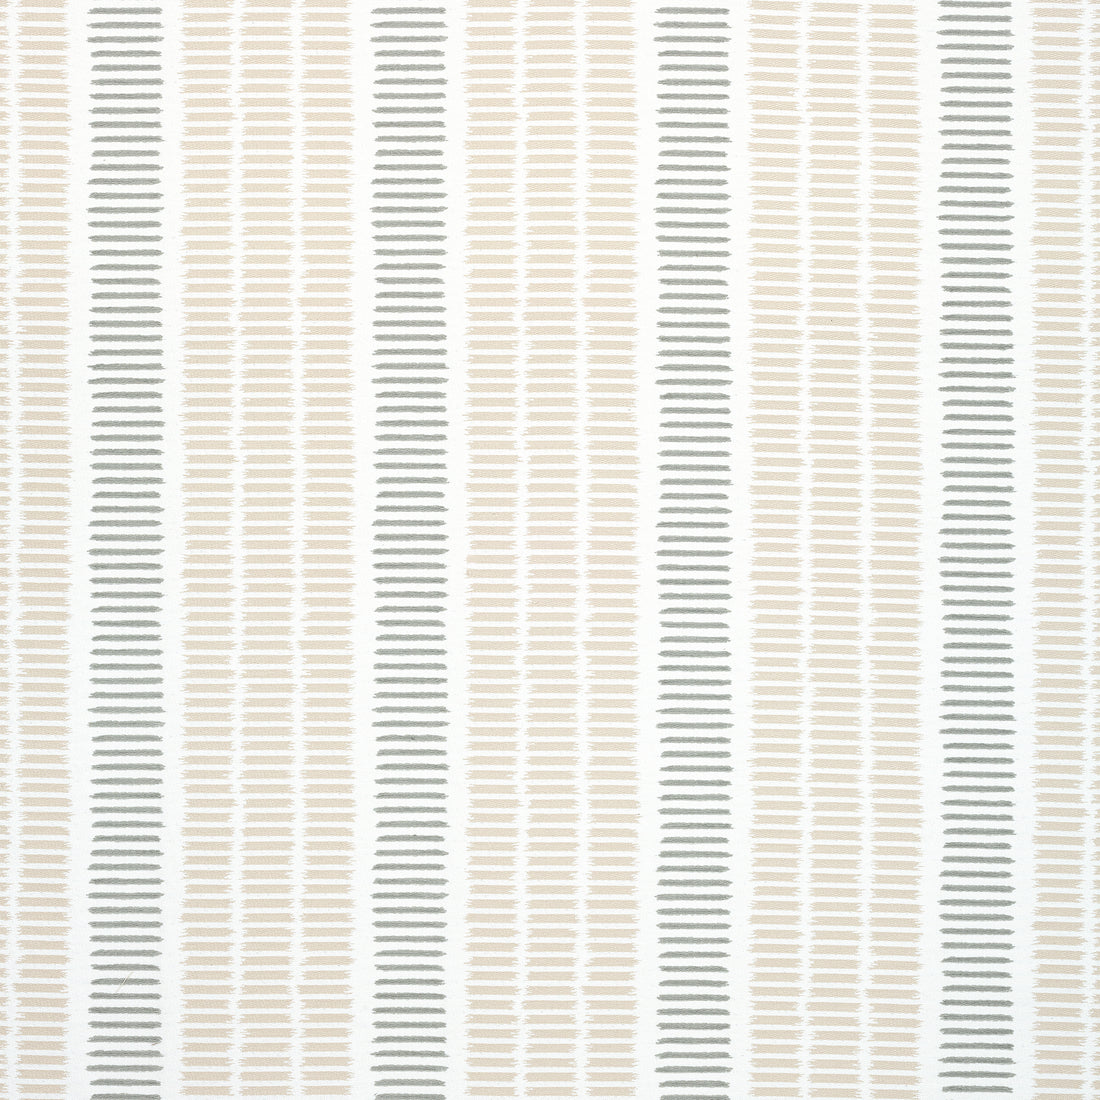 Topsail Stripe fabric in flax and nickel color - pattern number W73519 - by Thibaut in the Landmark collection